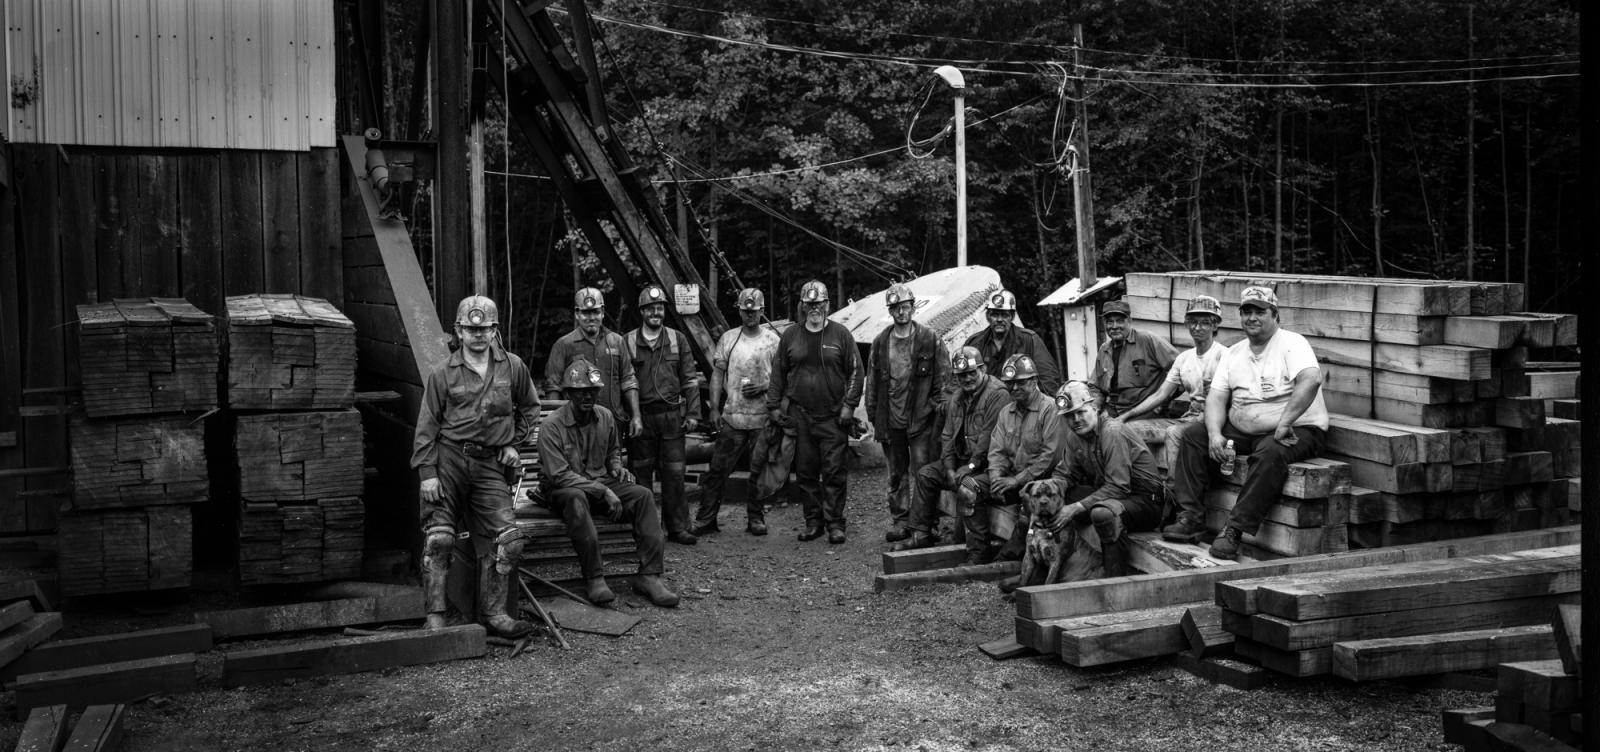 The Portraits -   Orchard Slope Mine crew with dog  